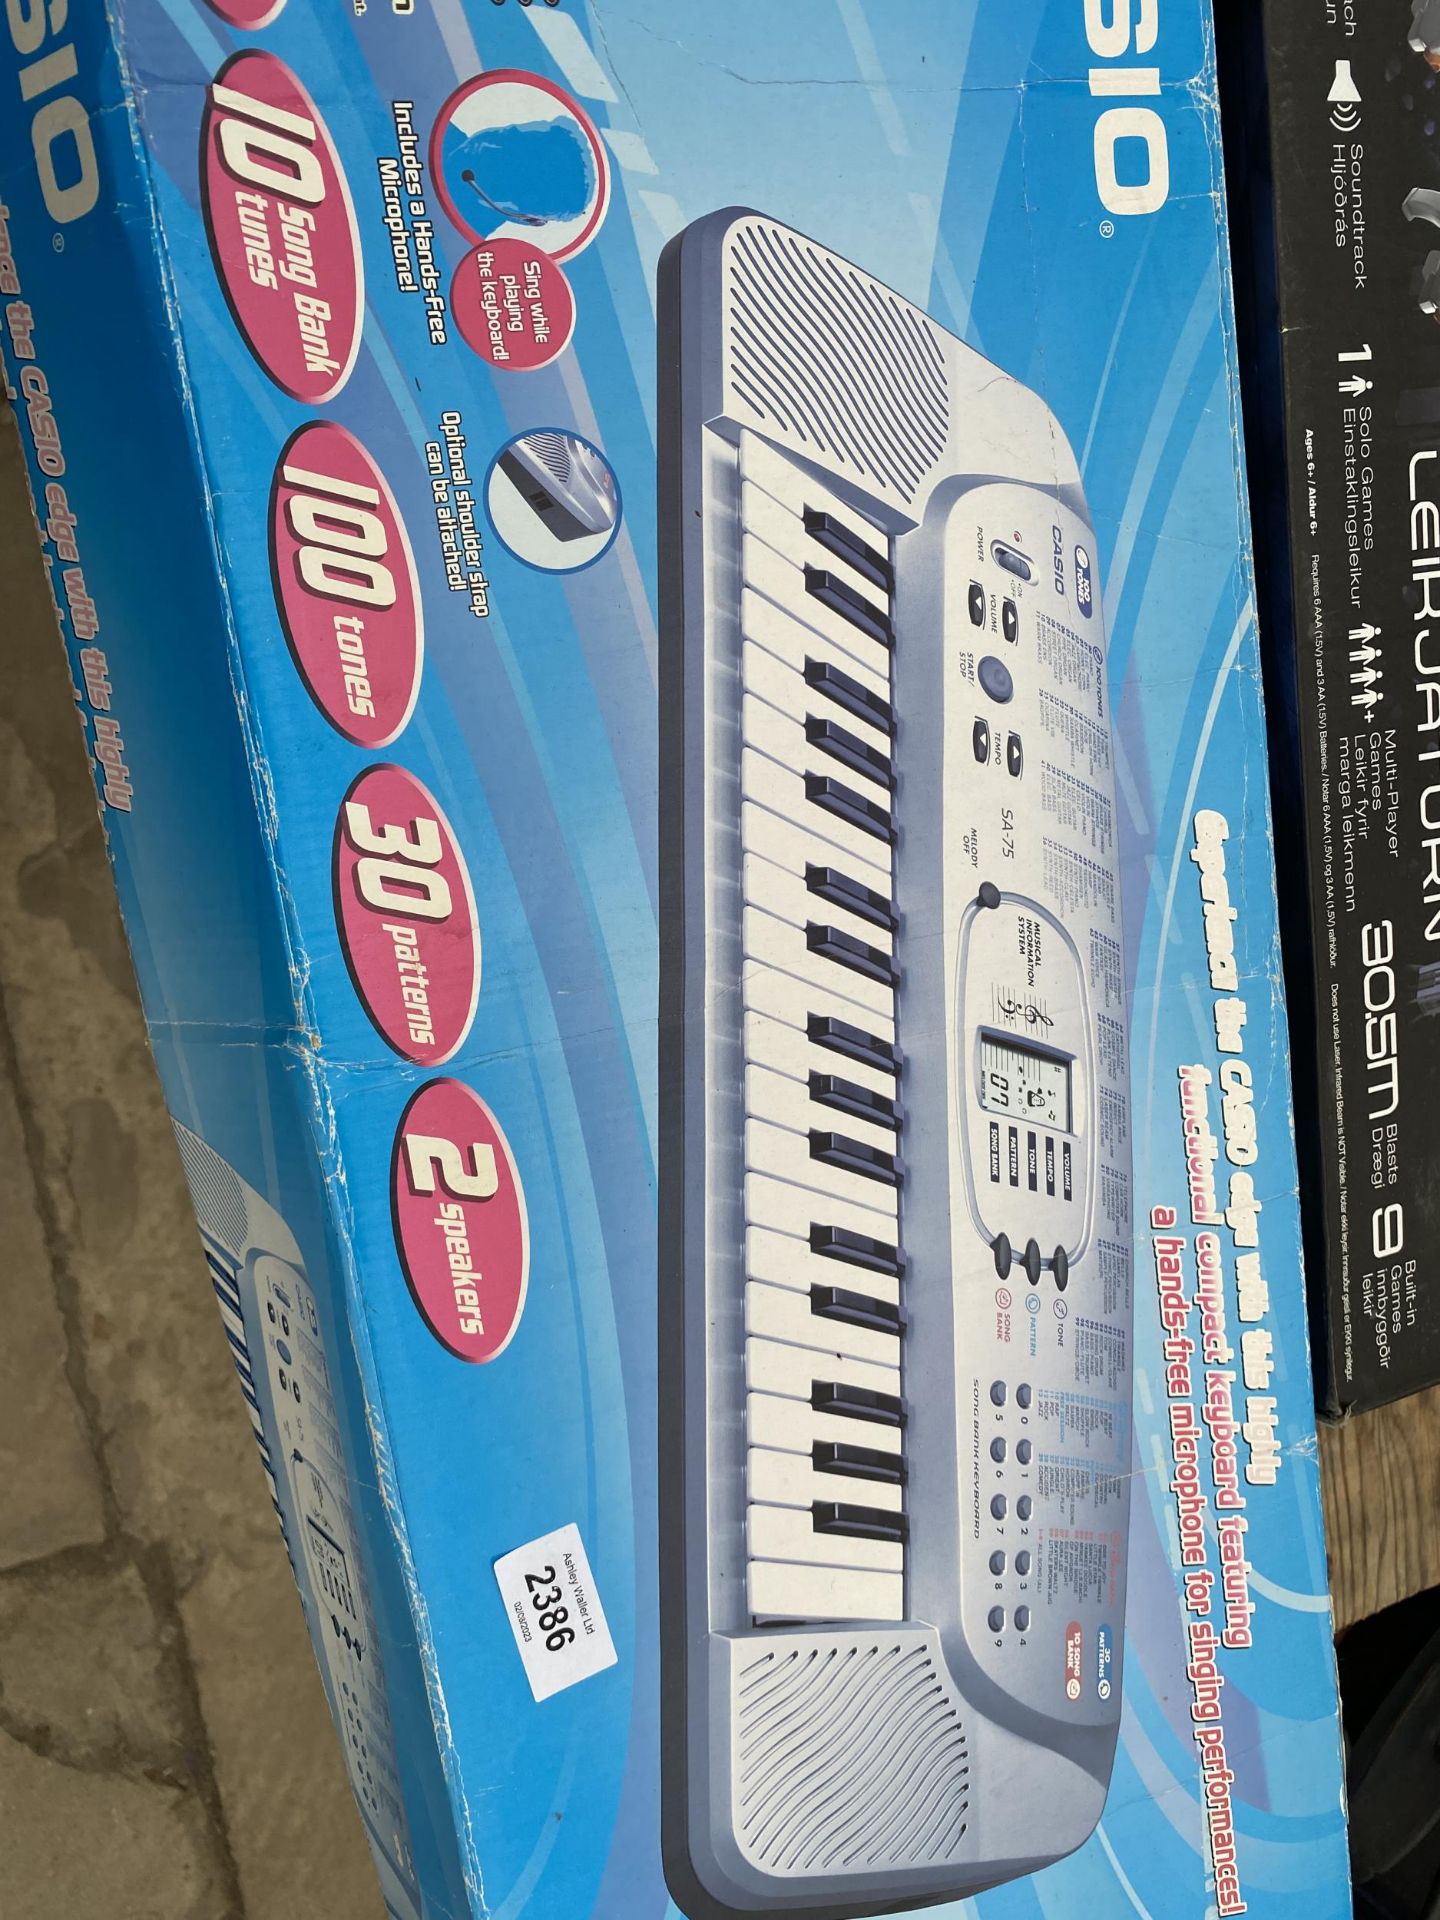 A CASIO KEYBOARD AND TWO LASERX GAMES - Image 3 of 3